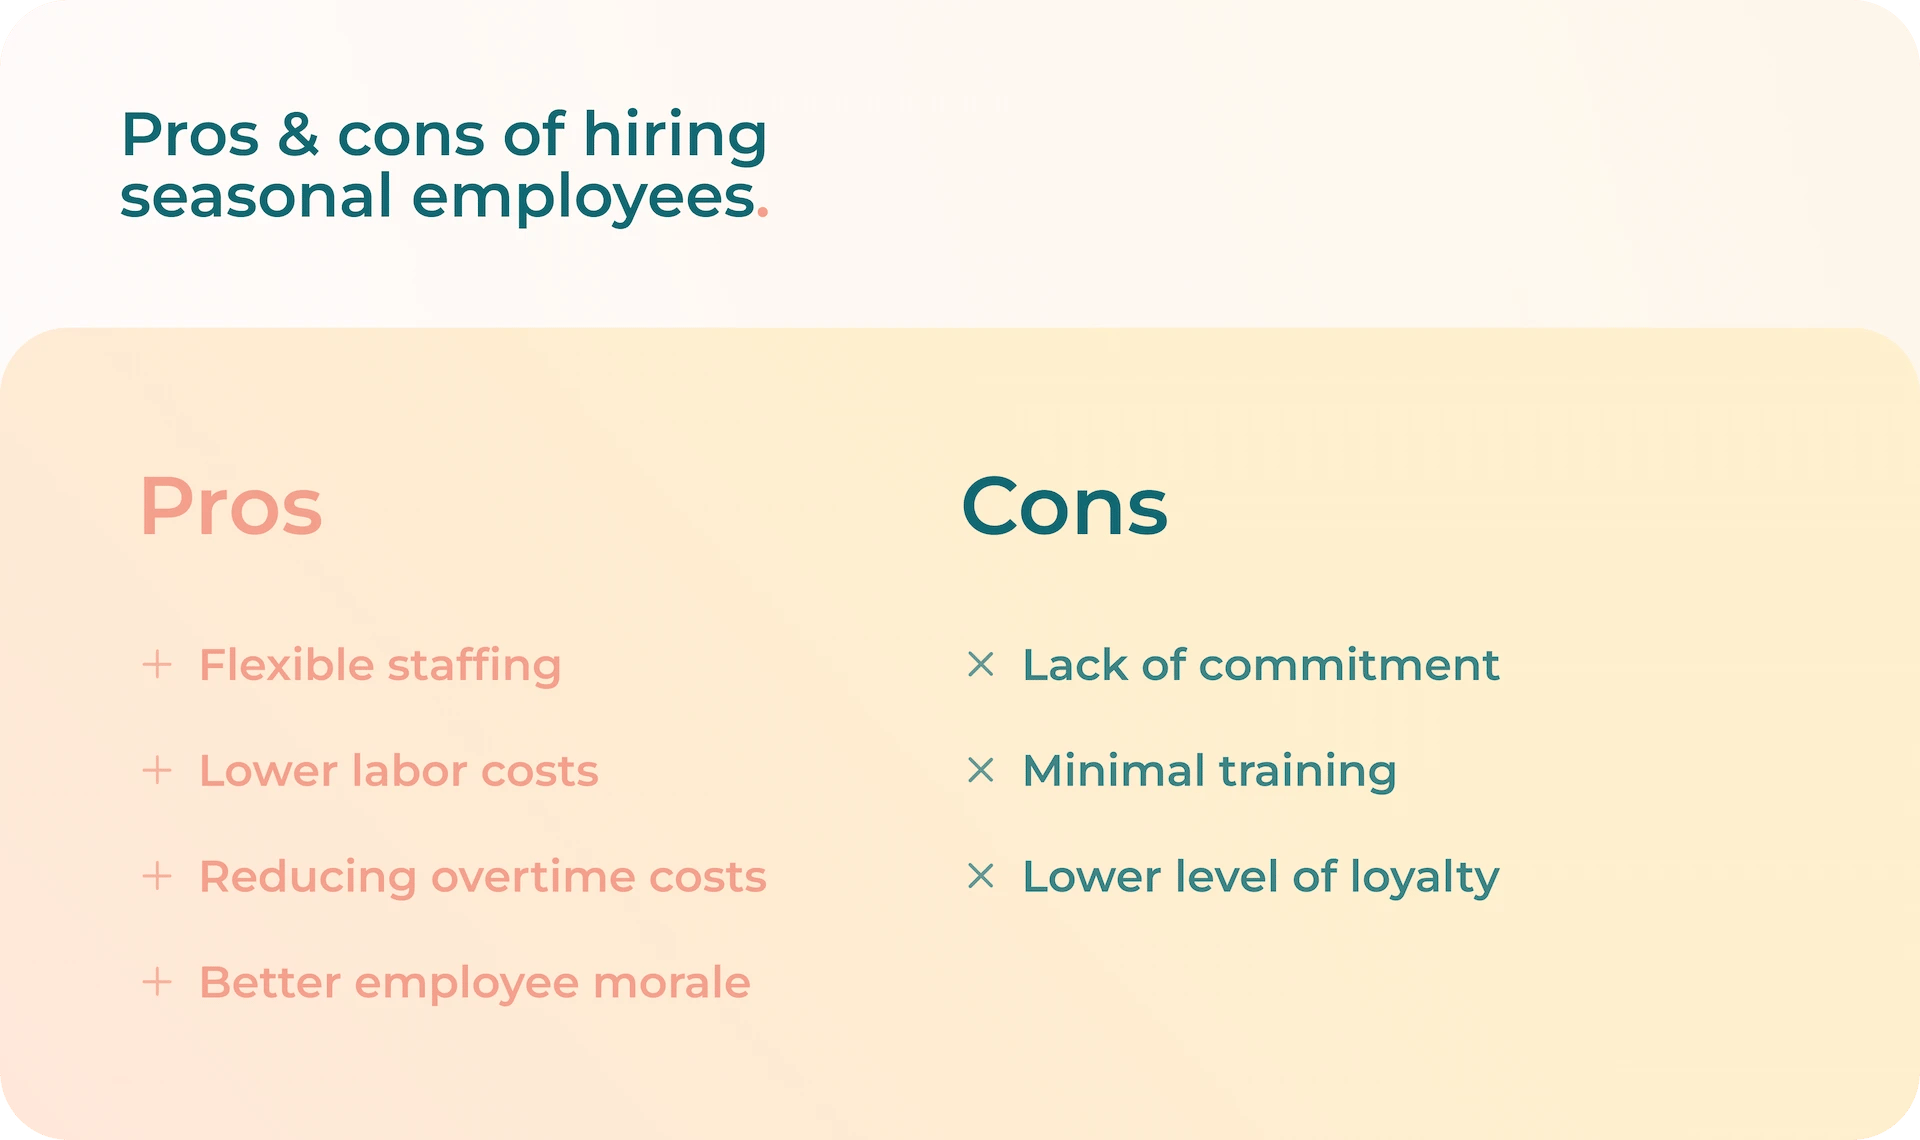 List of pros and cons to hire seasonal employees